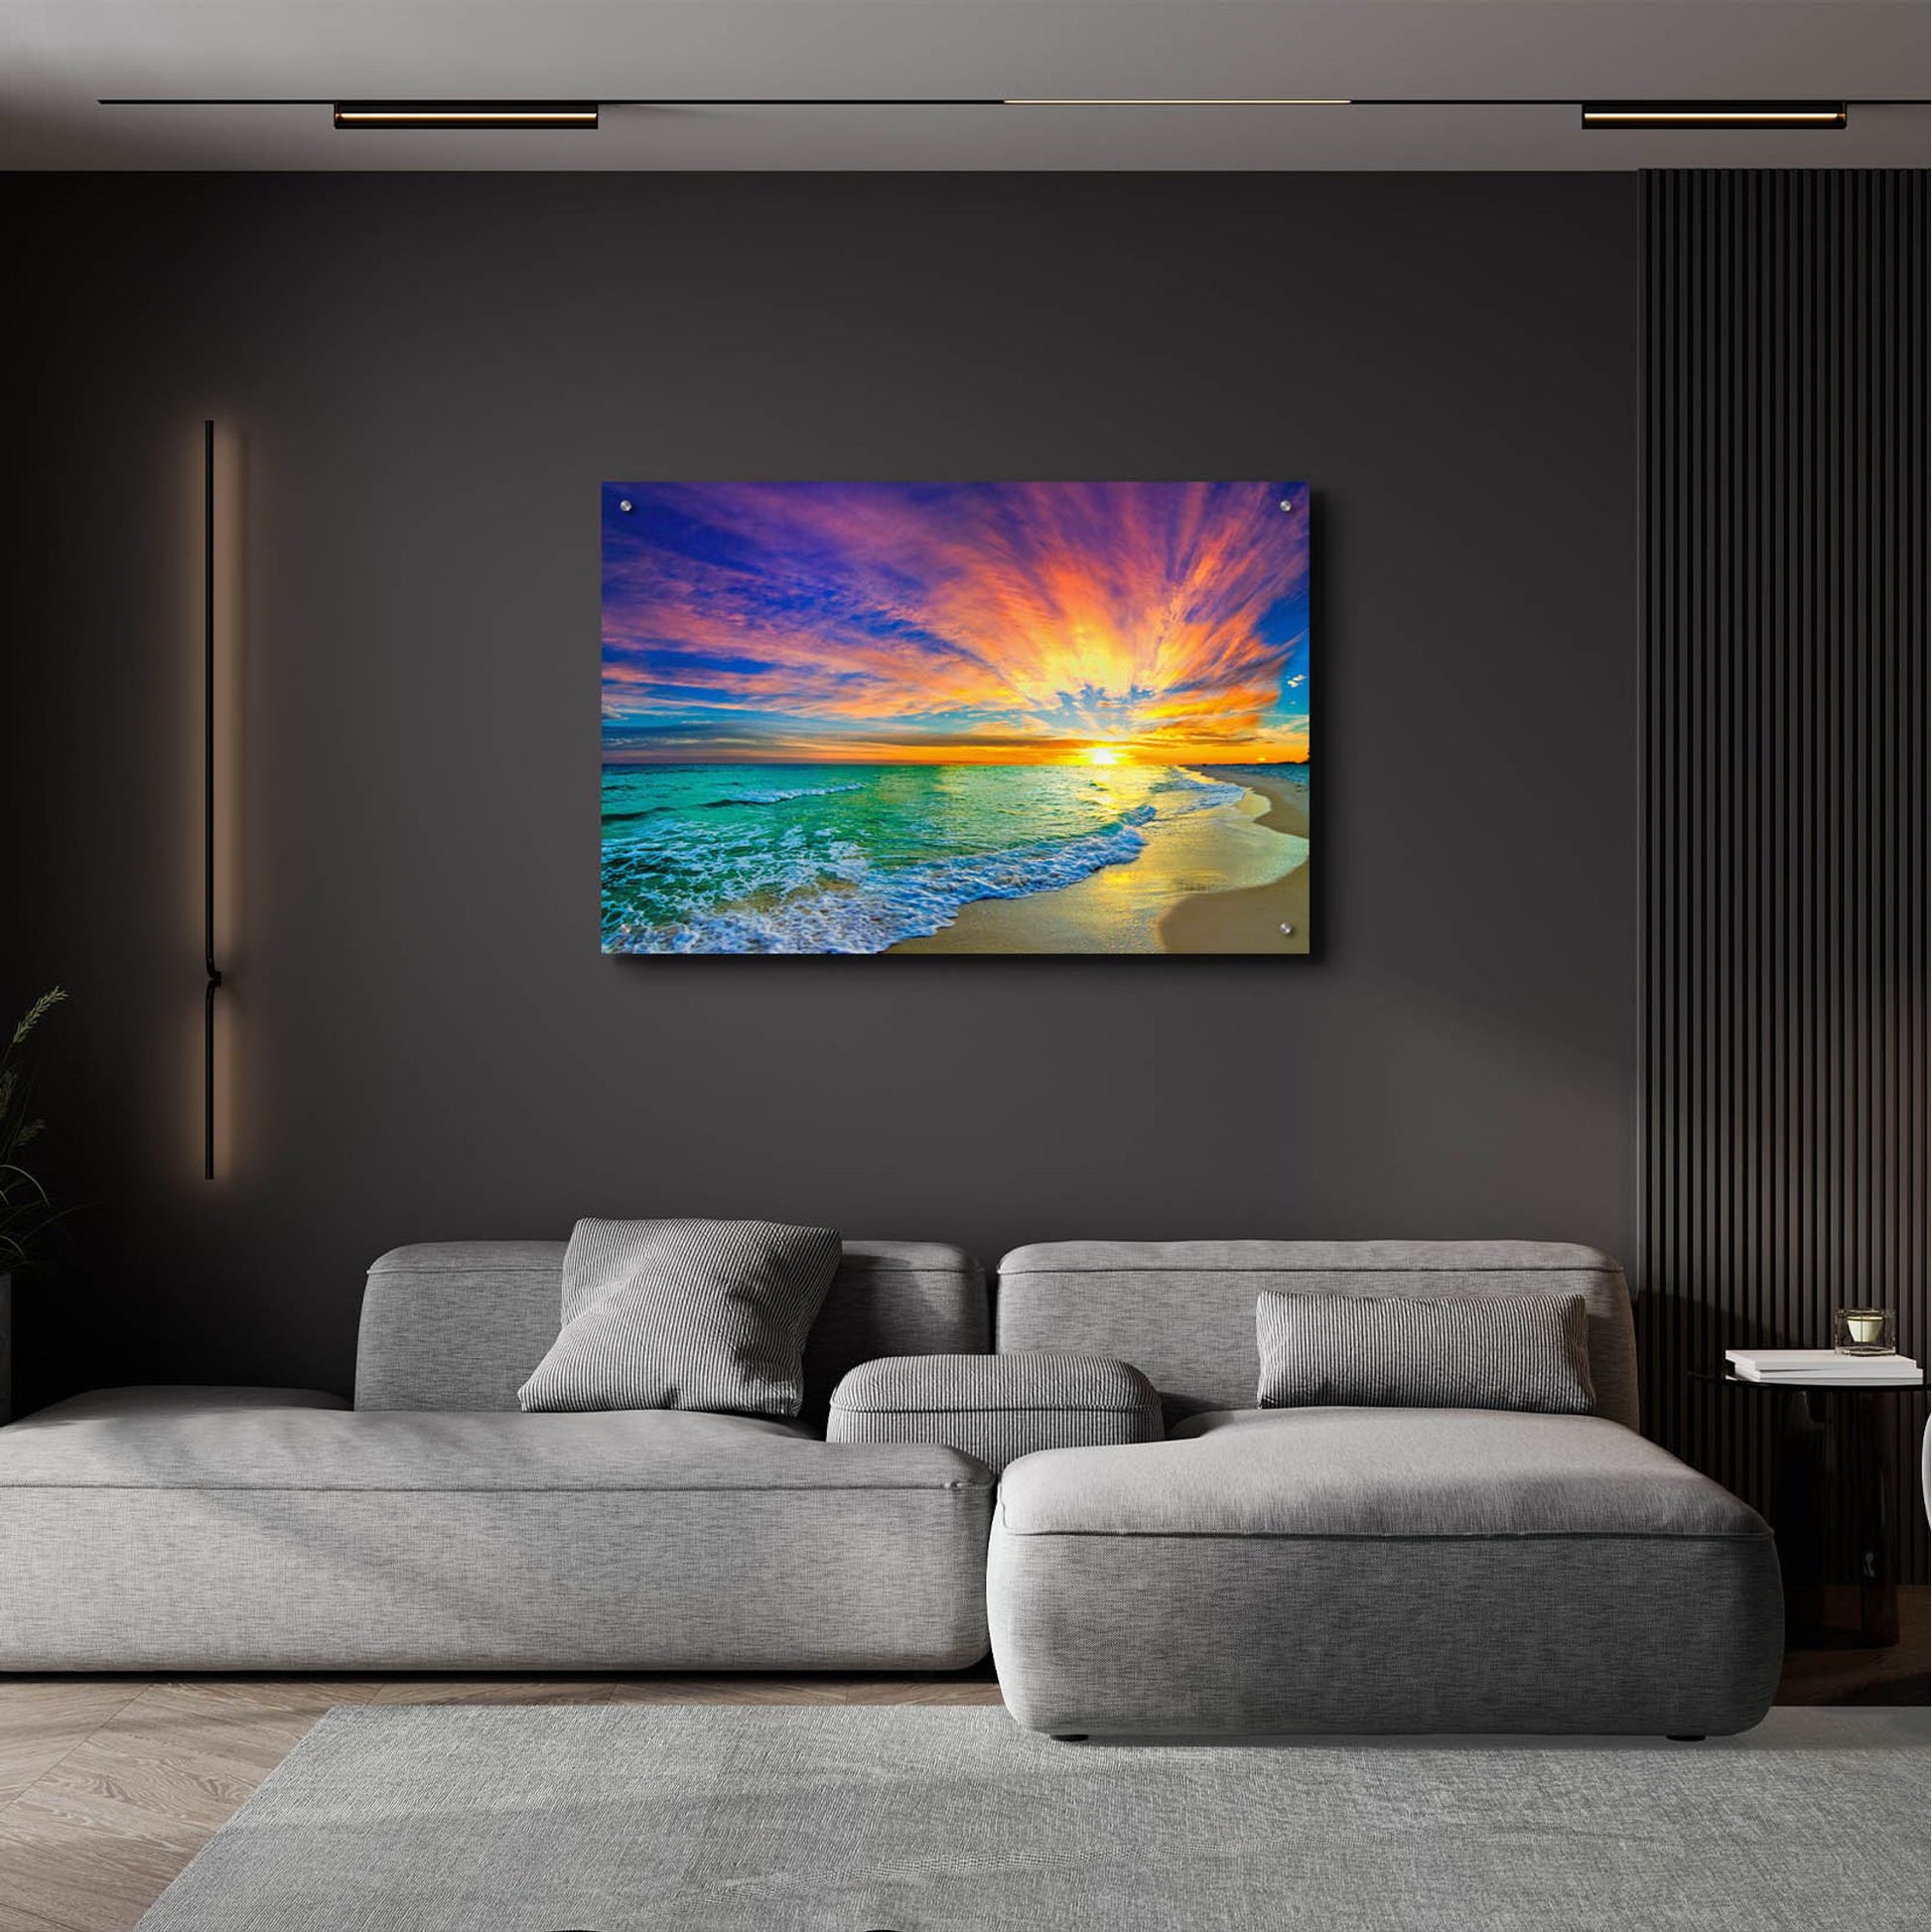 Epic Art 'Colorful Ocean Sunset Orange And Red Beach Sunset' by Ezra Tanner, Acrylic Glass Wall Art,36x24